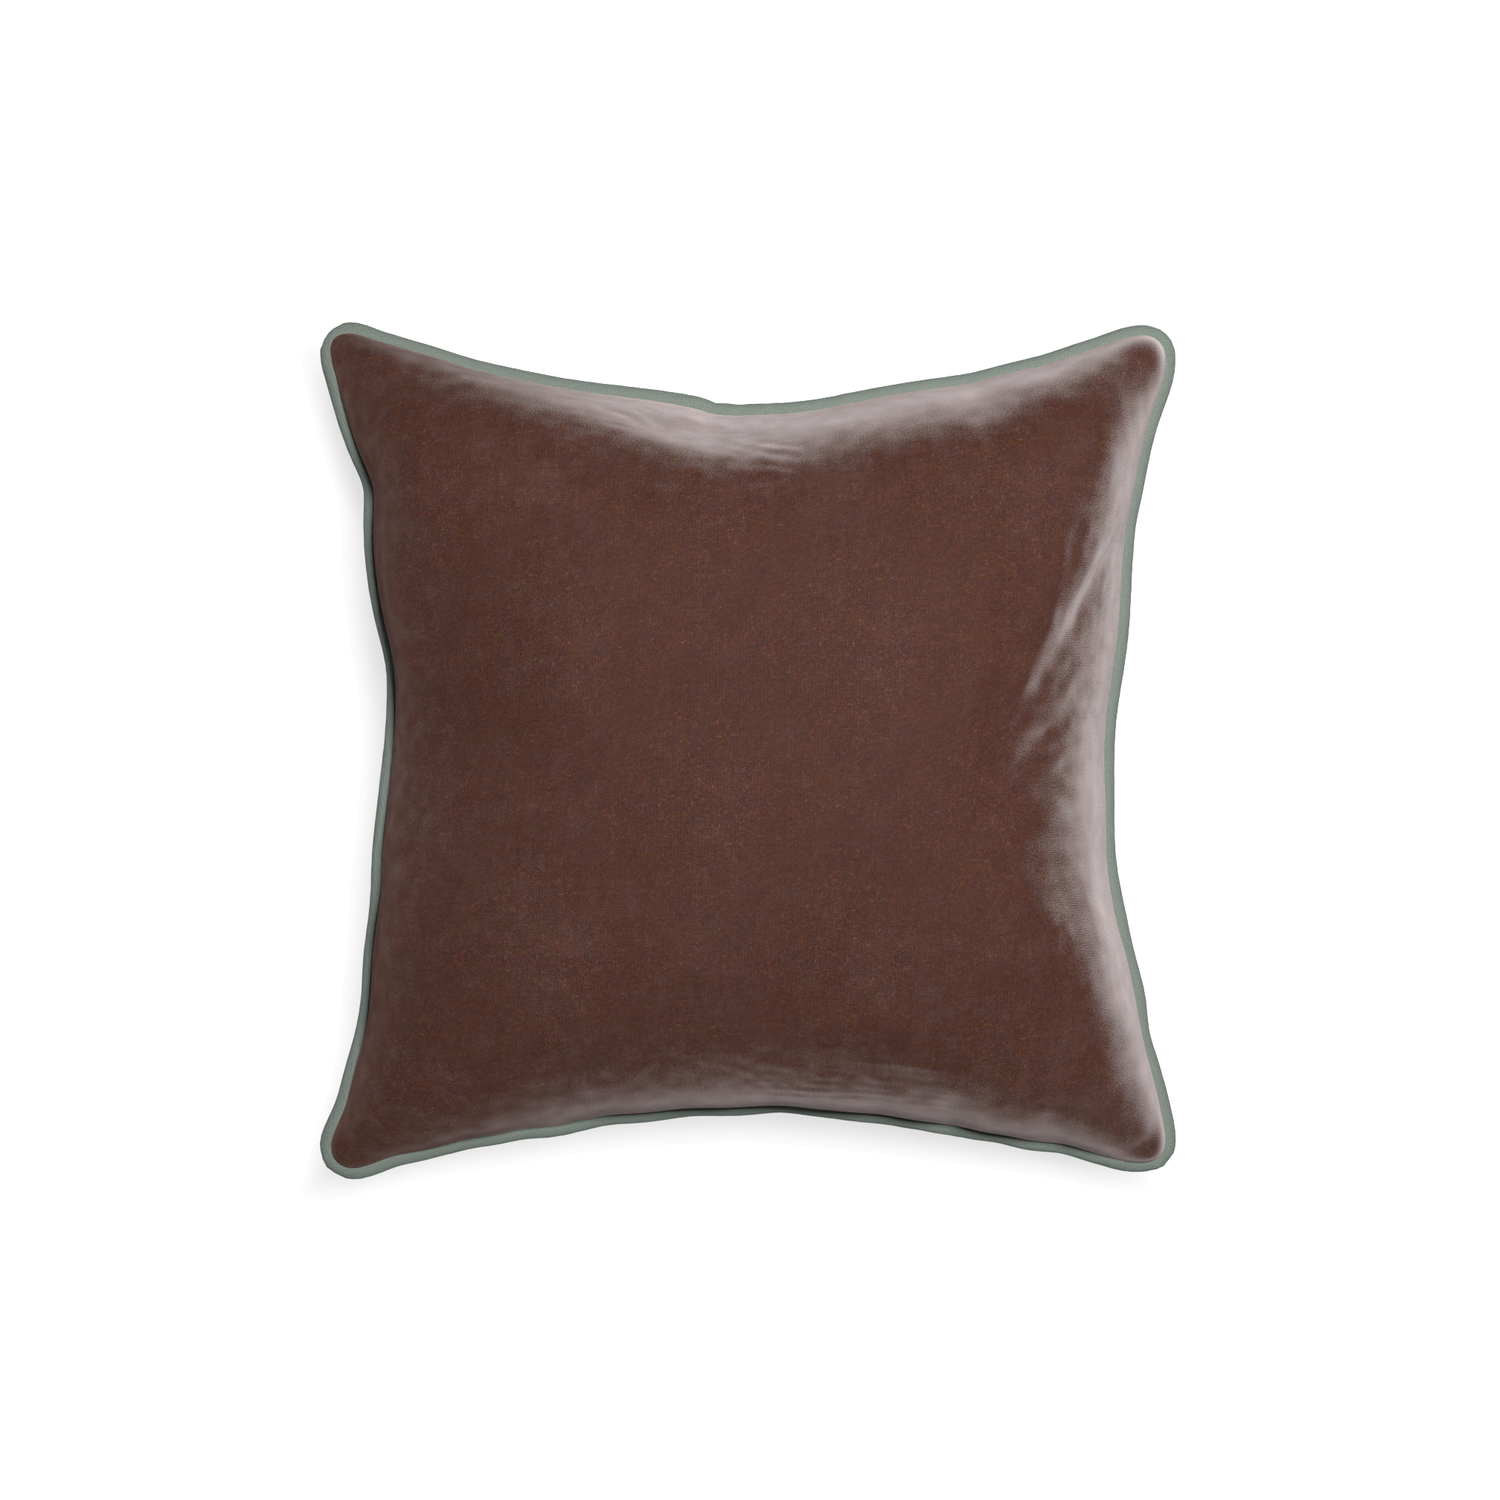 18-square walnut velvet custom brownpillow with sage piping on white background